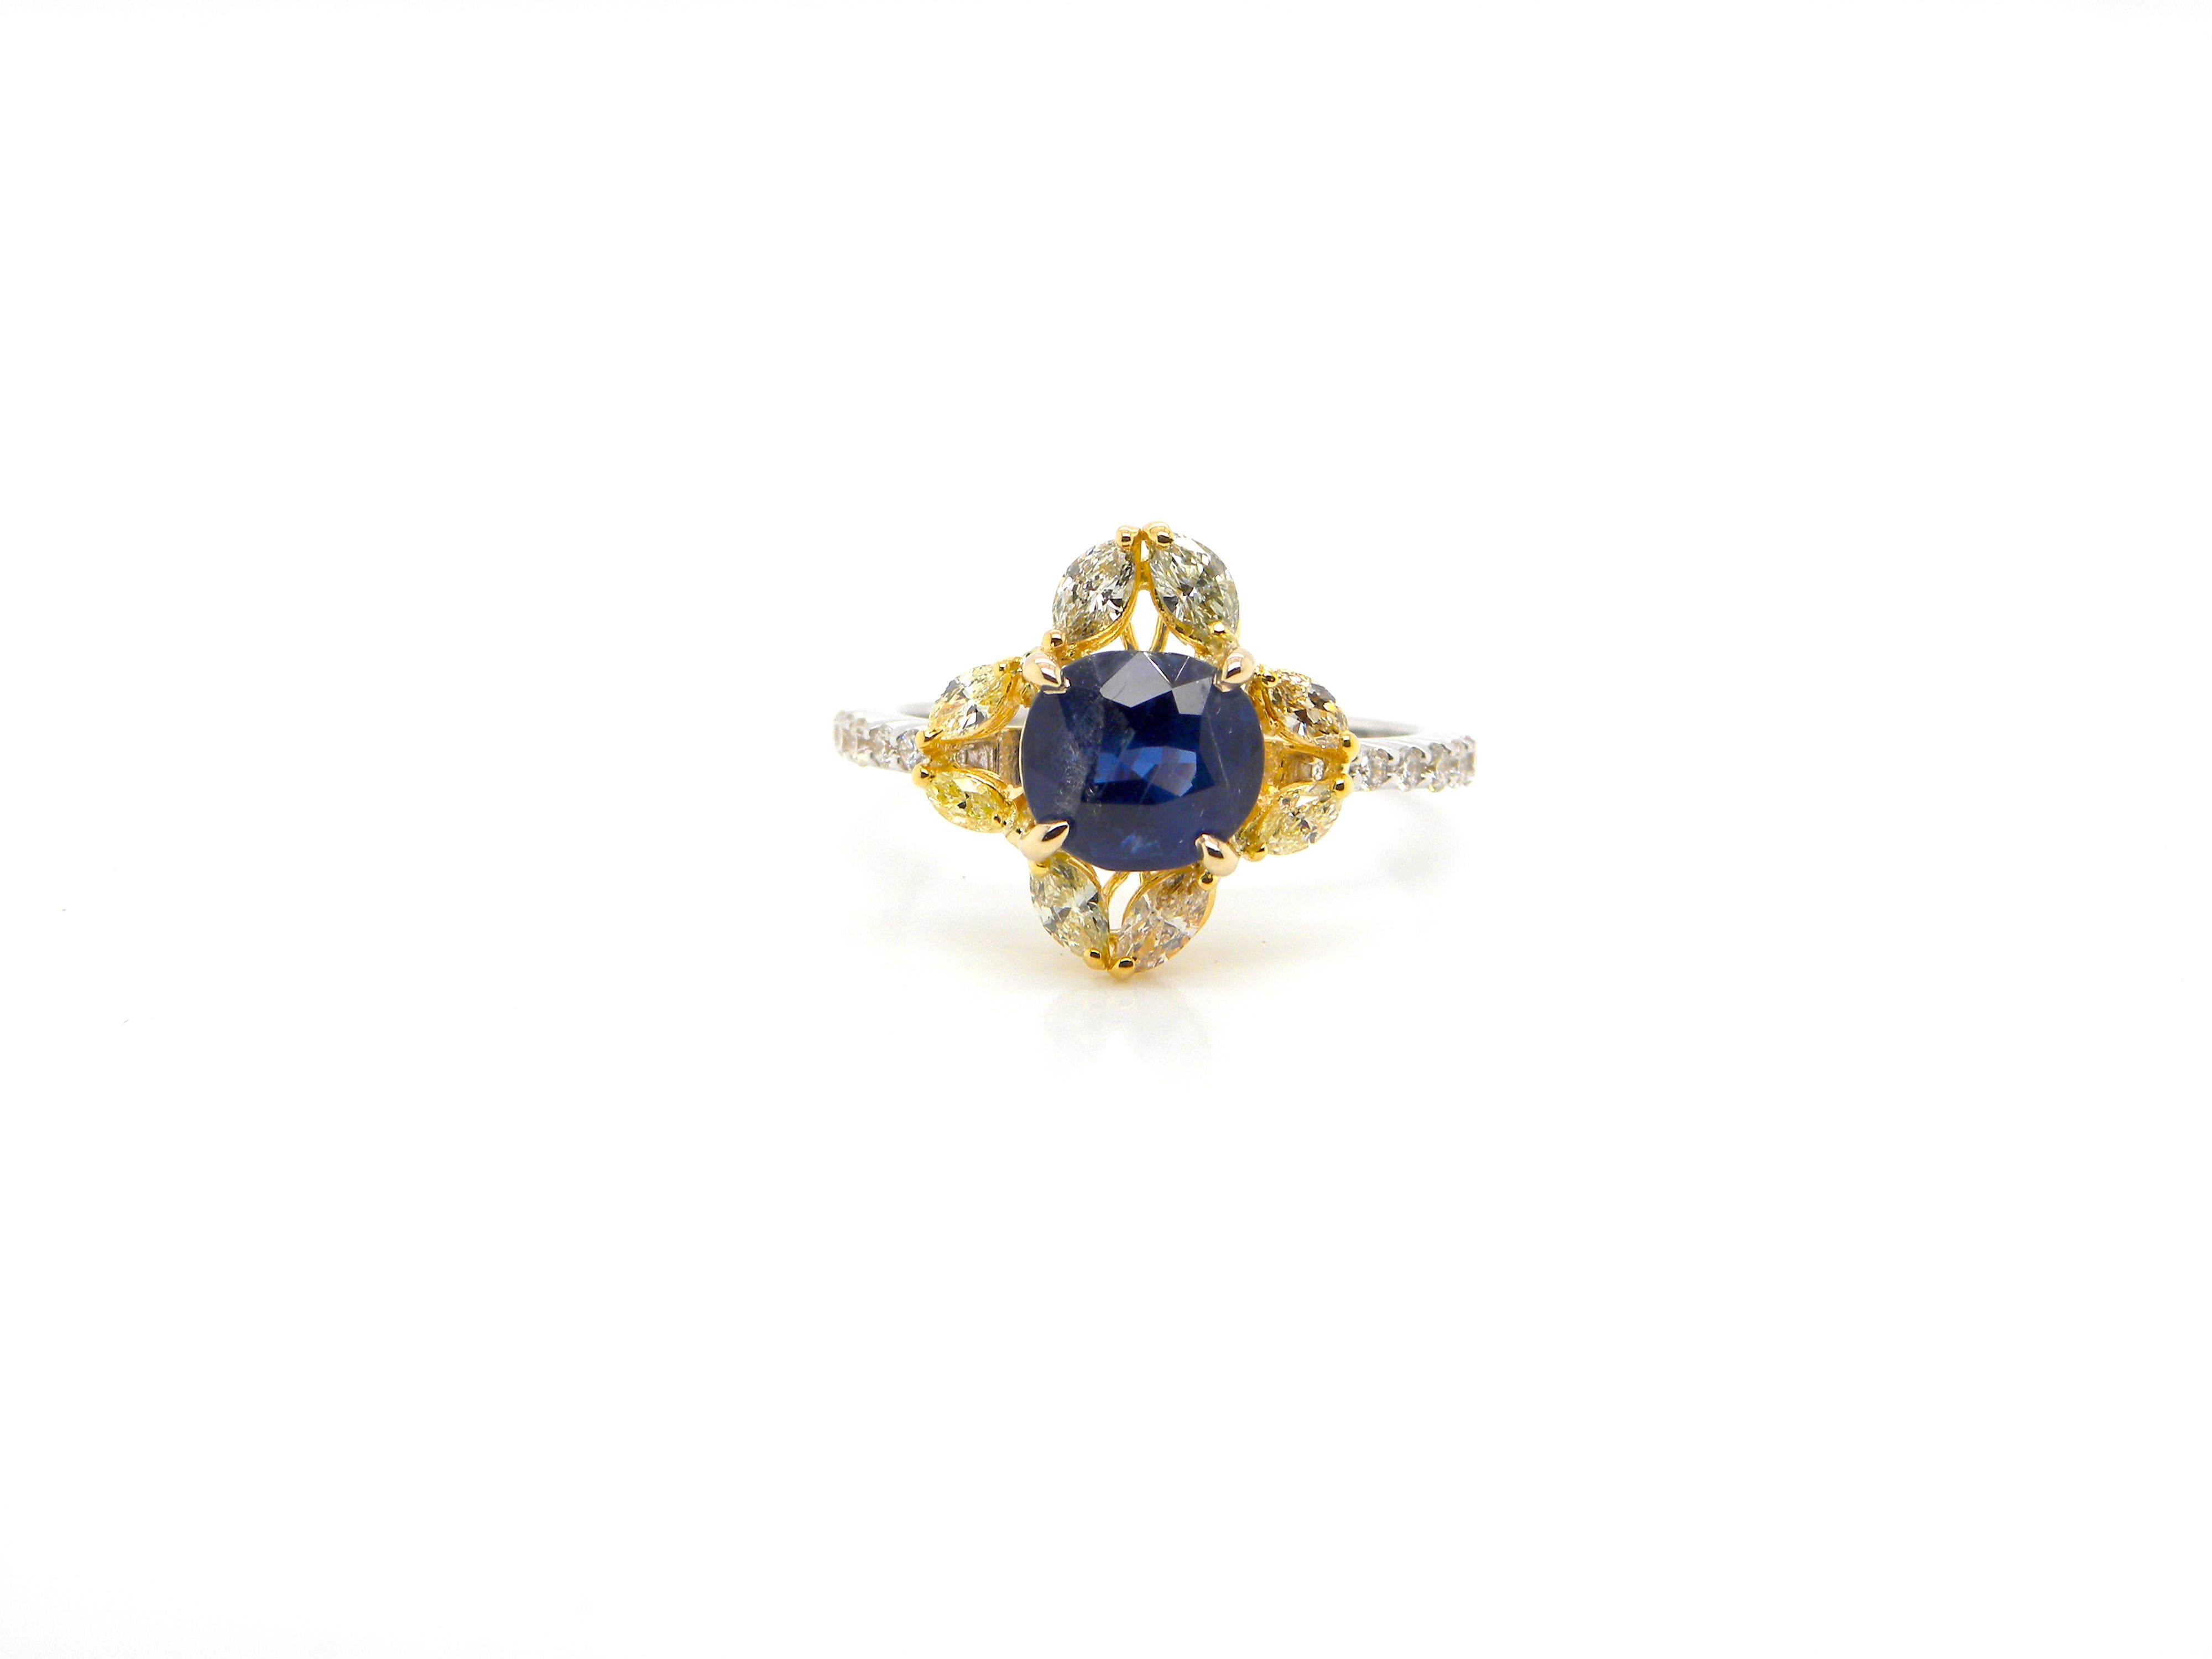 1.65 Carat Unheated Burmese Blue Sapphire and Diamond Gold Engagement Ring:

A beautiful ring, it features a gorgeous antique cushion-cut unheated Burmese blue sapphire weighing 1.65 carat, surrounded by a flowery halo of yellow marquise-cut